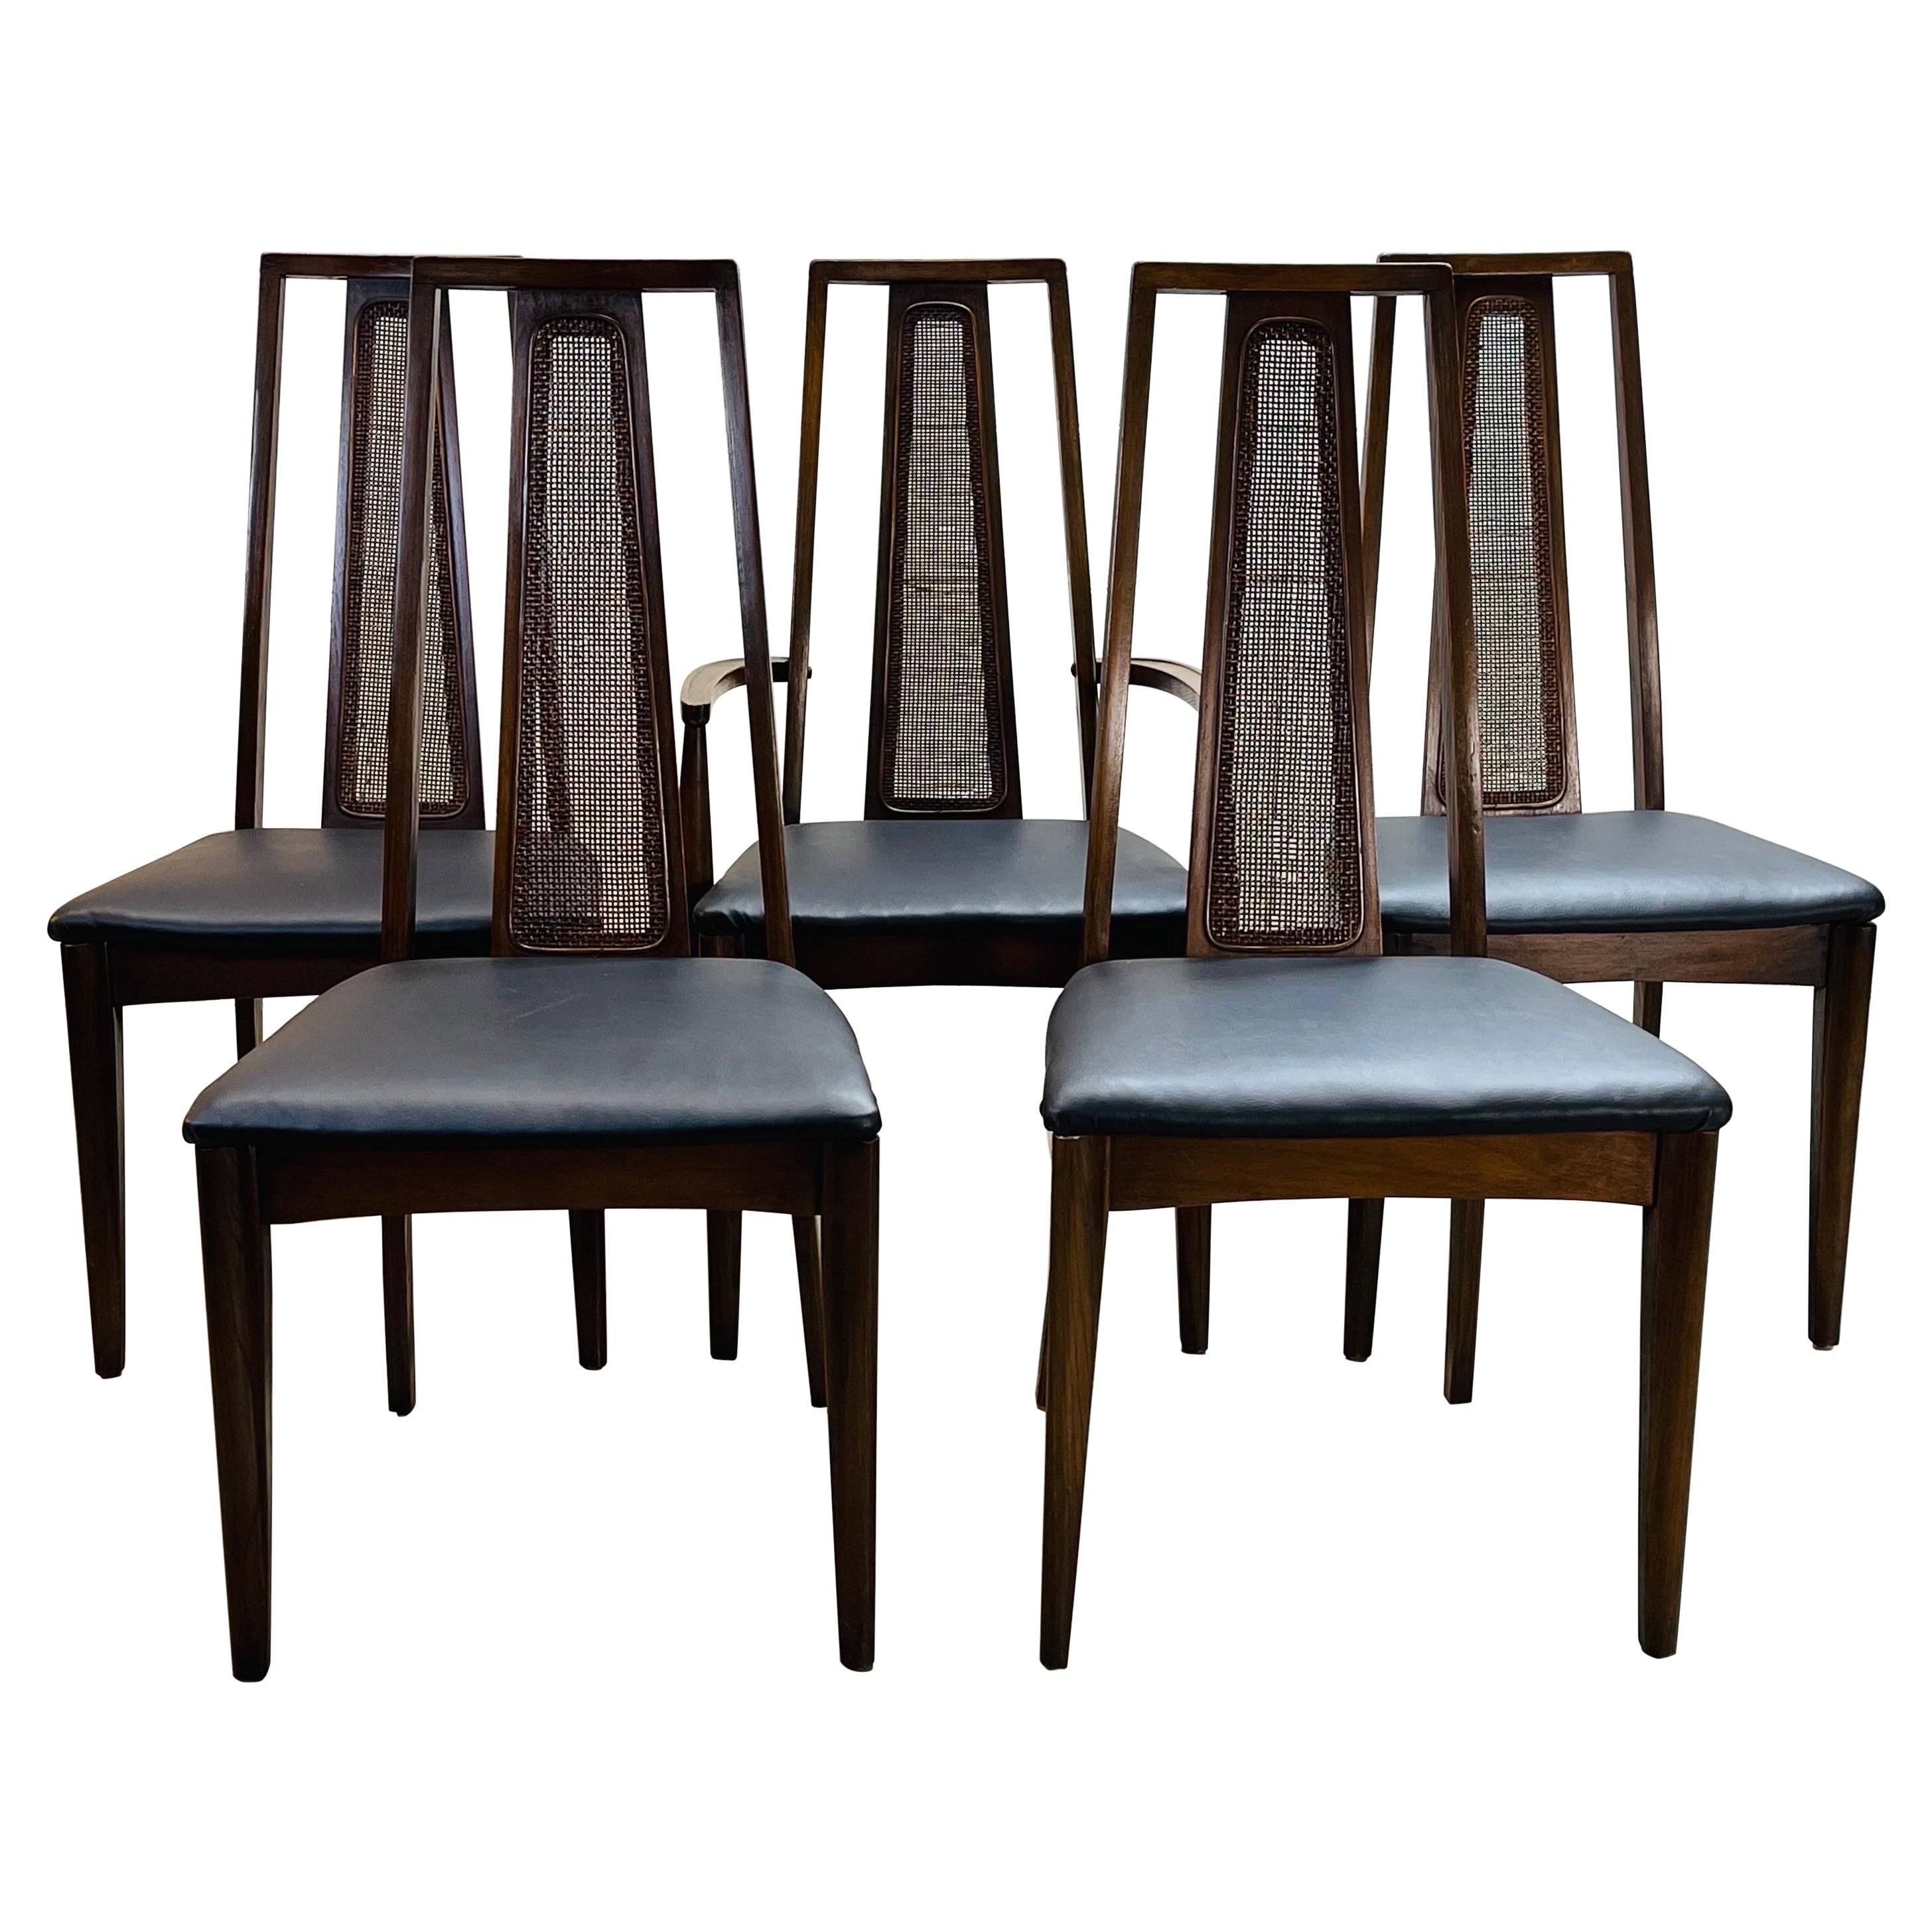 1960s Cane Back Dining Room Chairs, Set of 5 For Sale